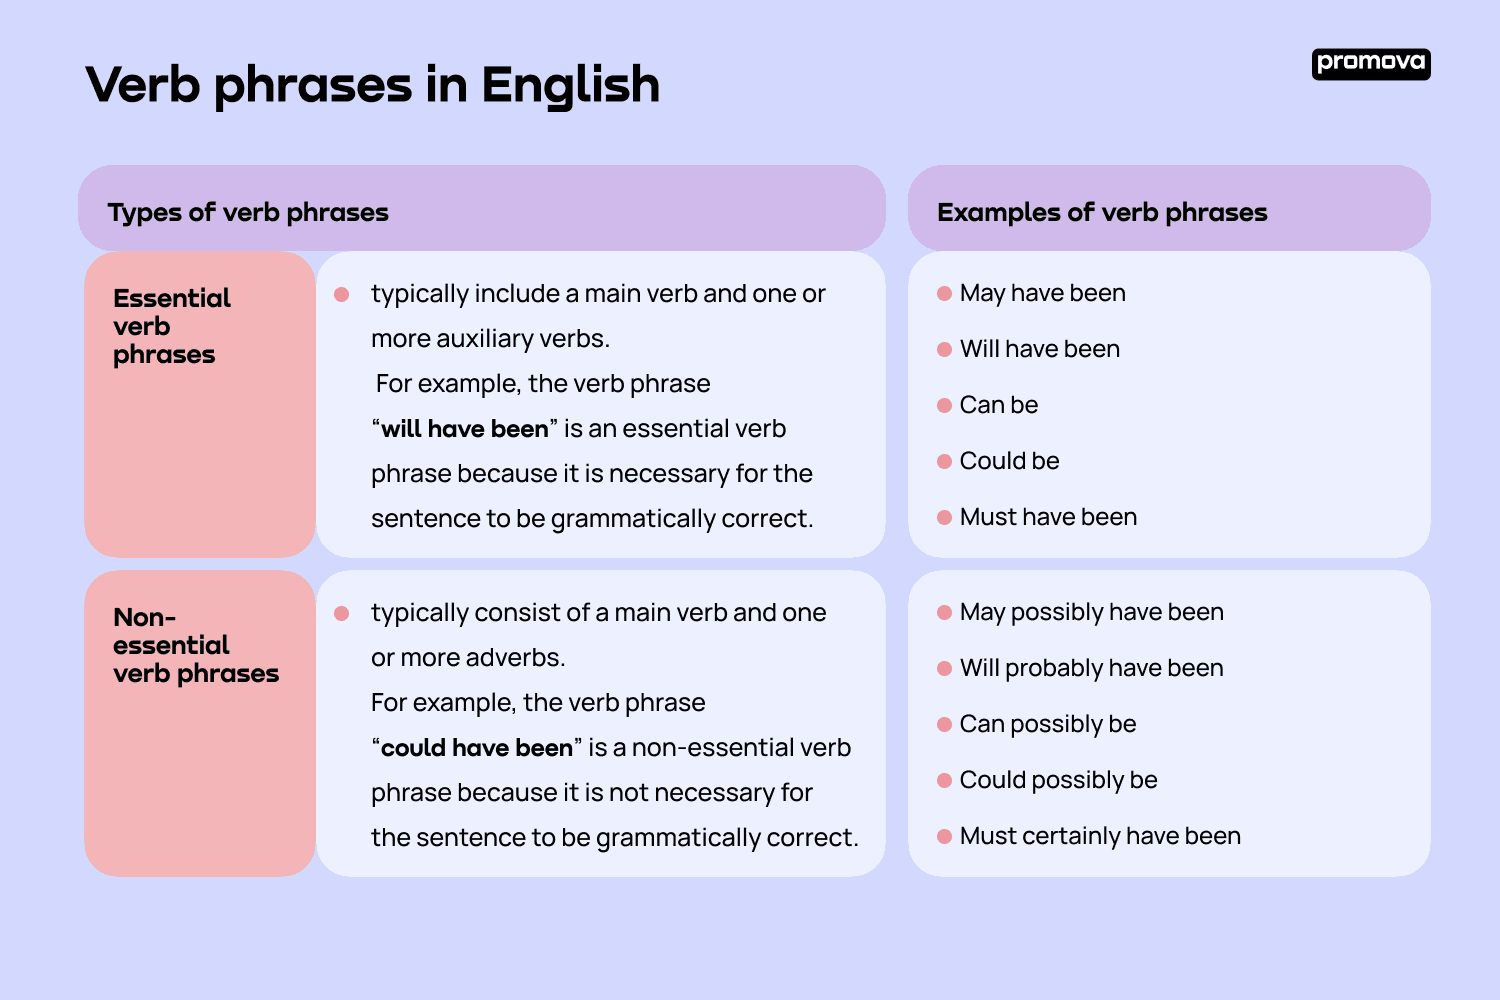 Verb phrases in English